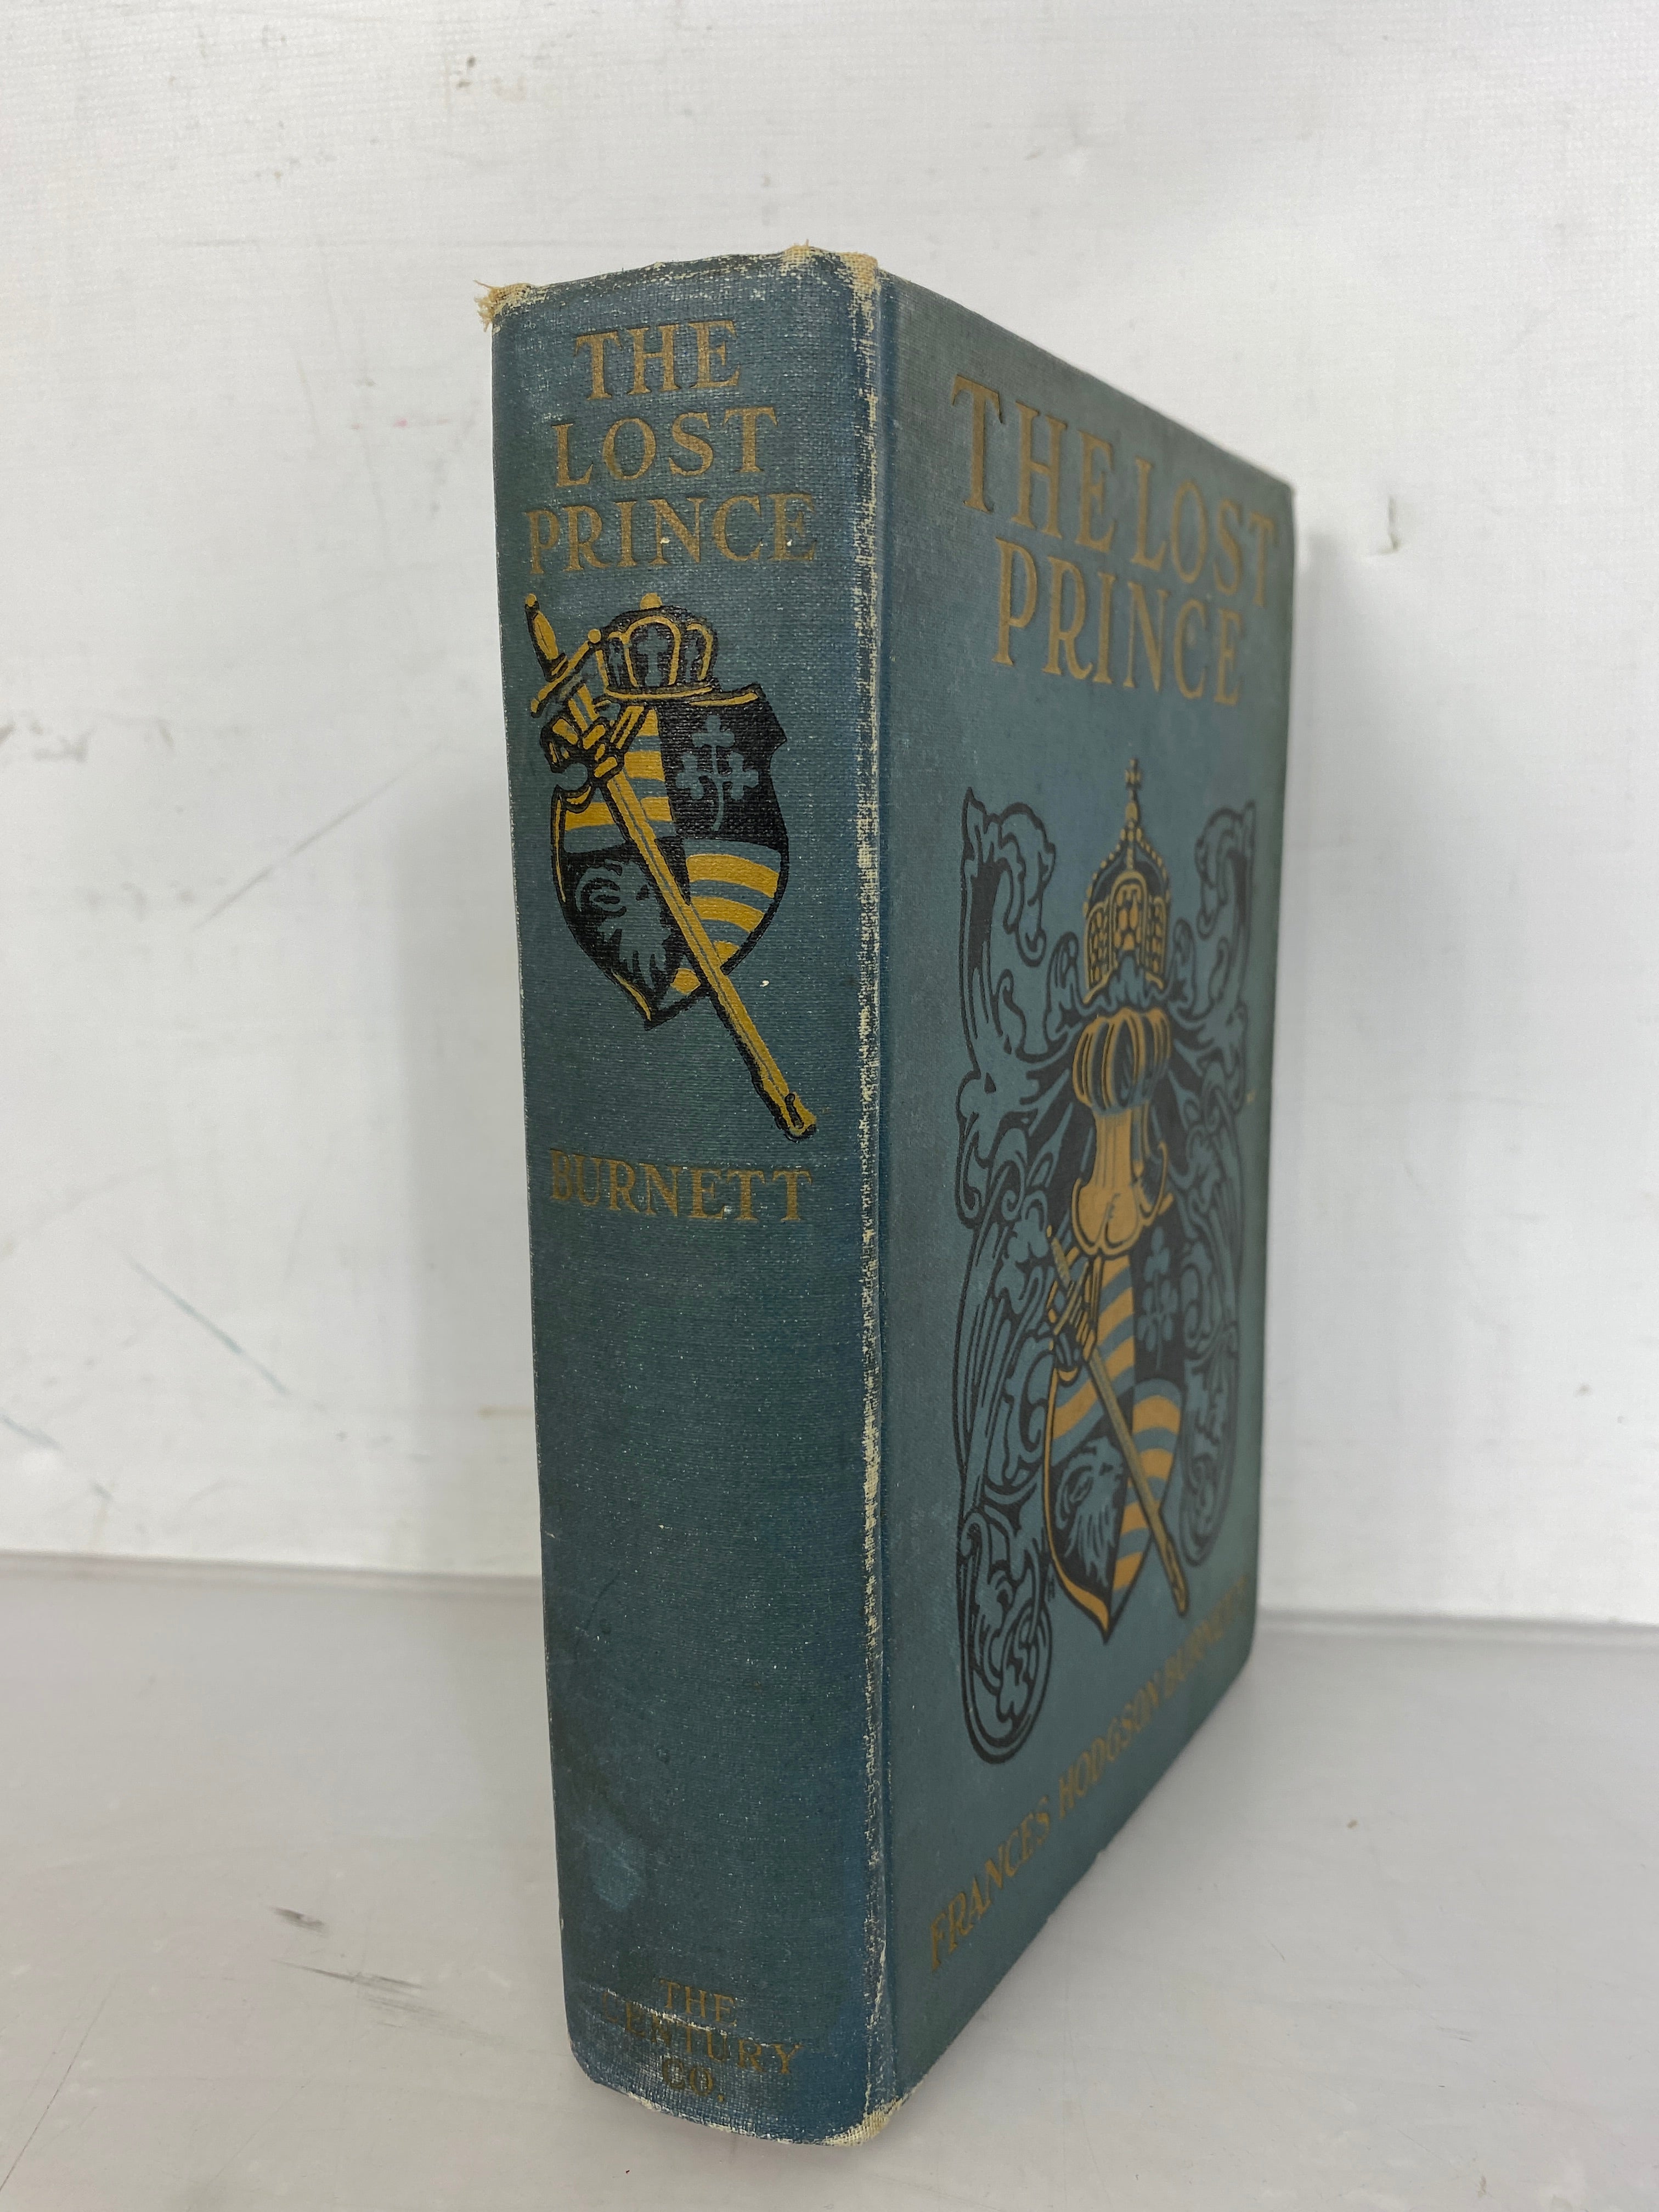 Antique First Edition The Lost Prince by Frances Hodgson Burnett 1915 HC